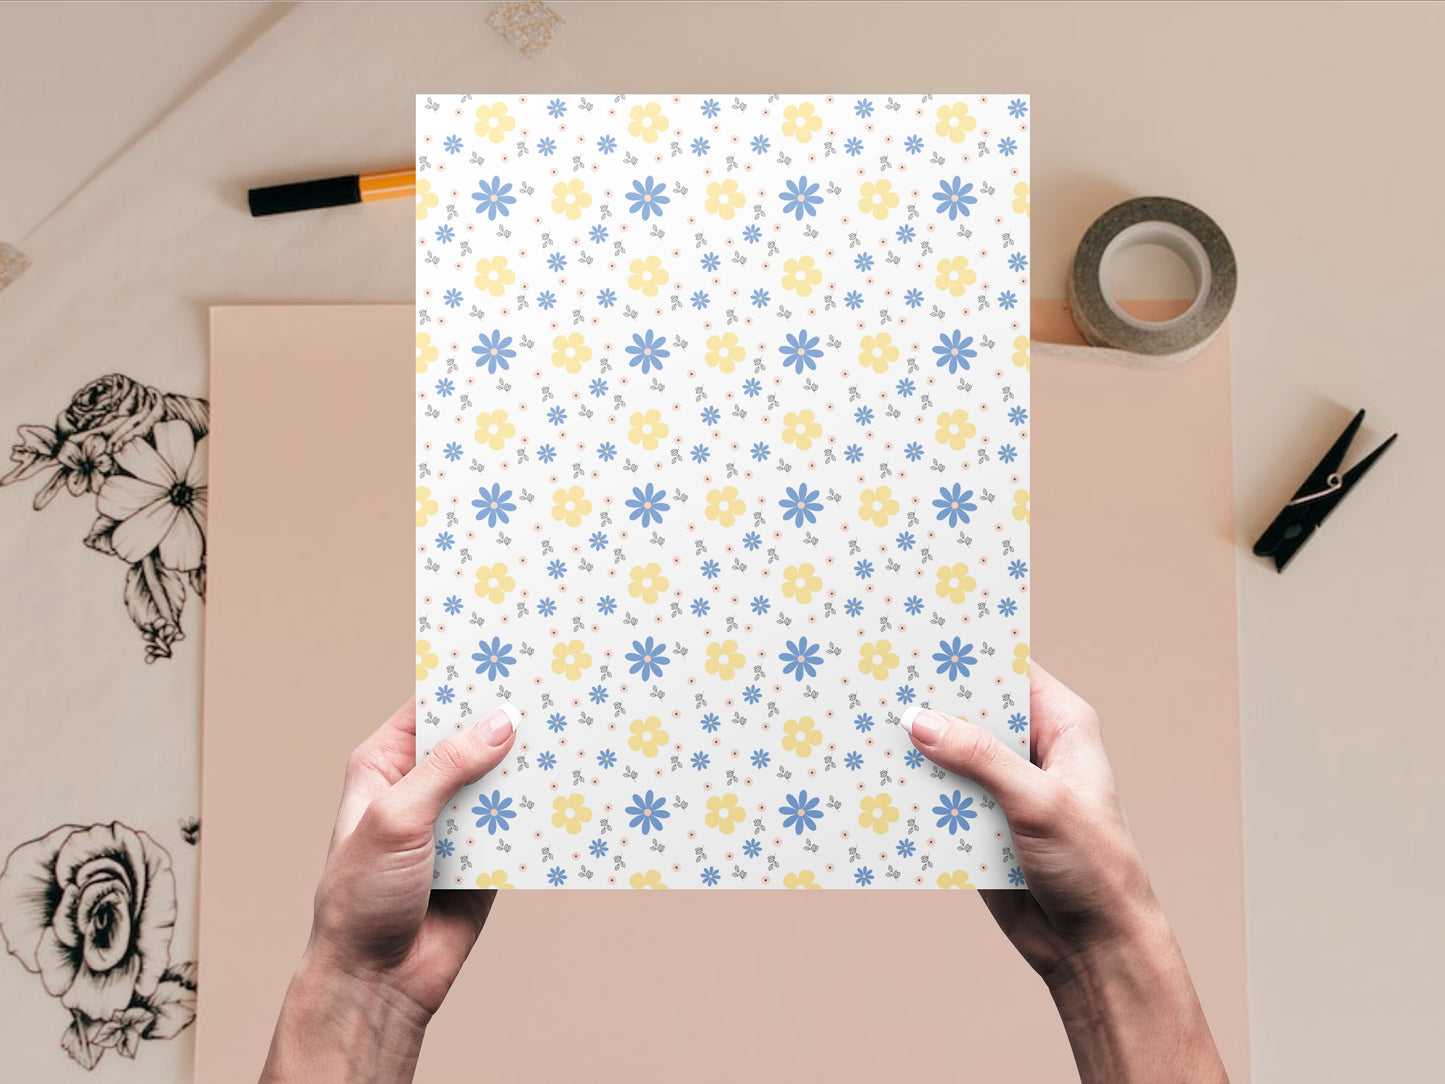 The dollhouse wallpaper pattern of blue and yellow flowers is held by a woman above a desk